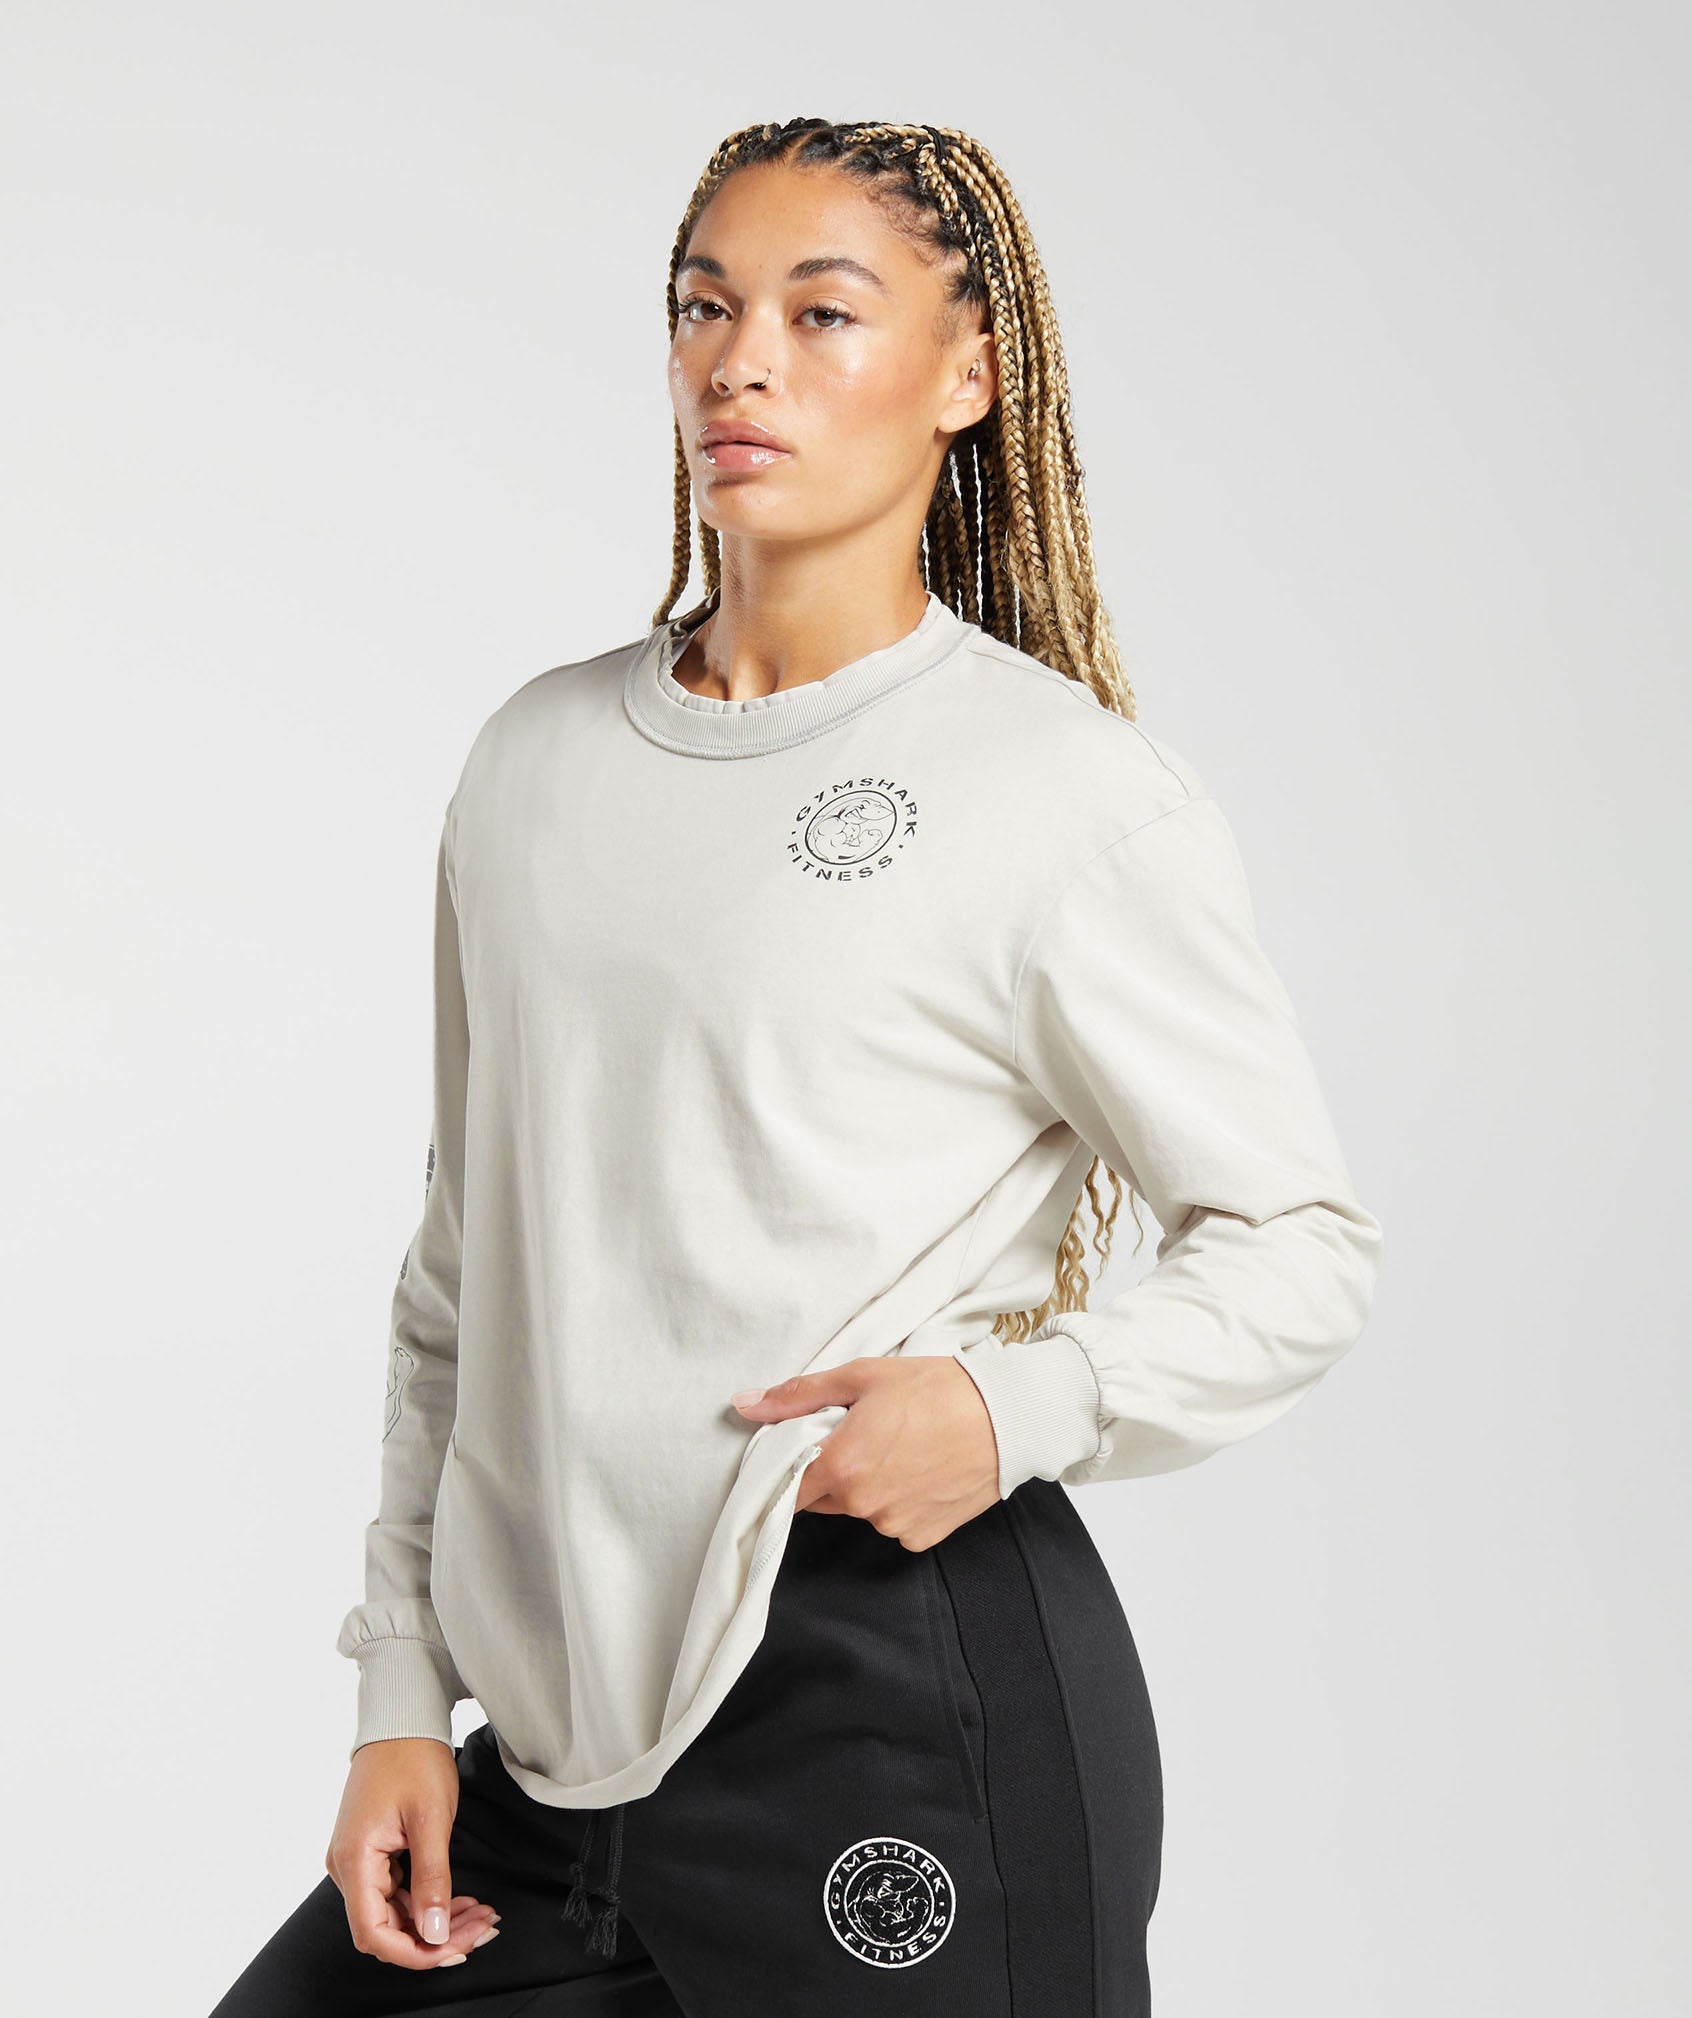 Legacy Washed Long Sleeve Top in Metal Grey/Acid Wash - view 3